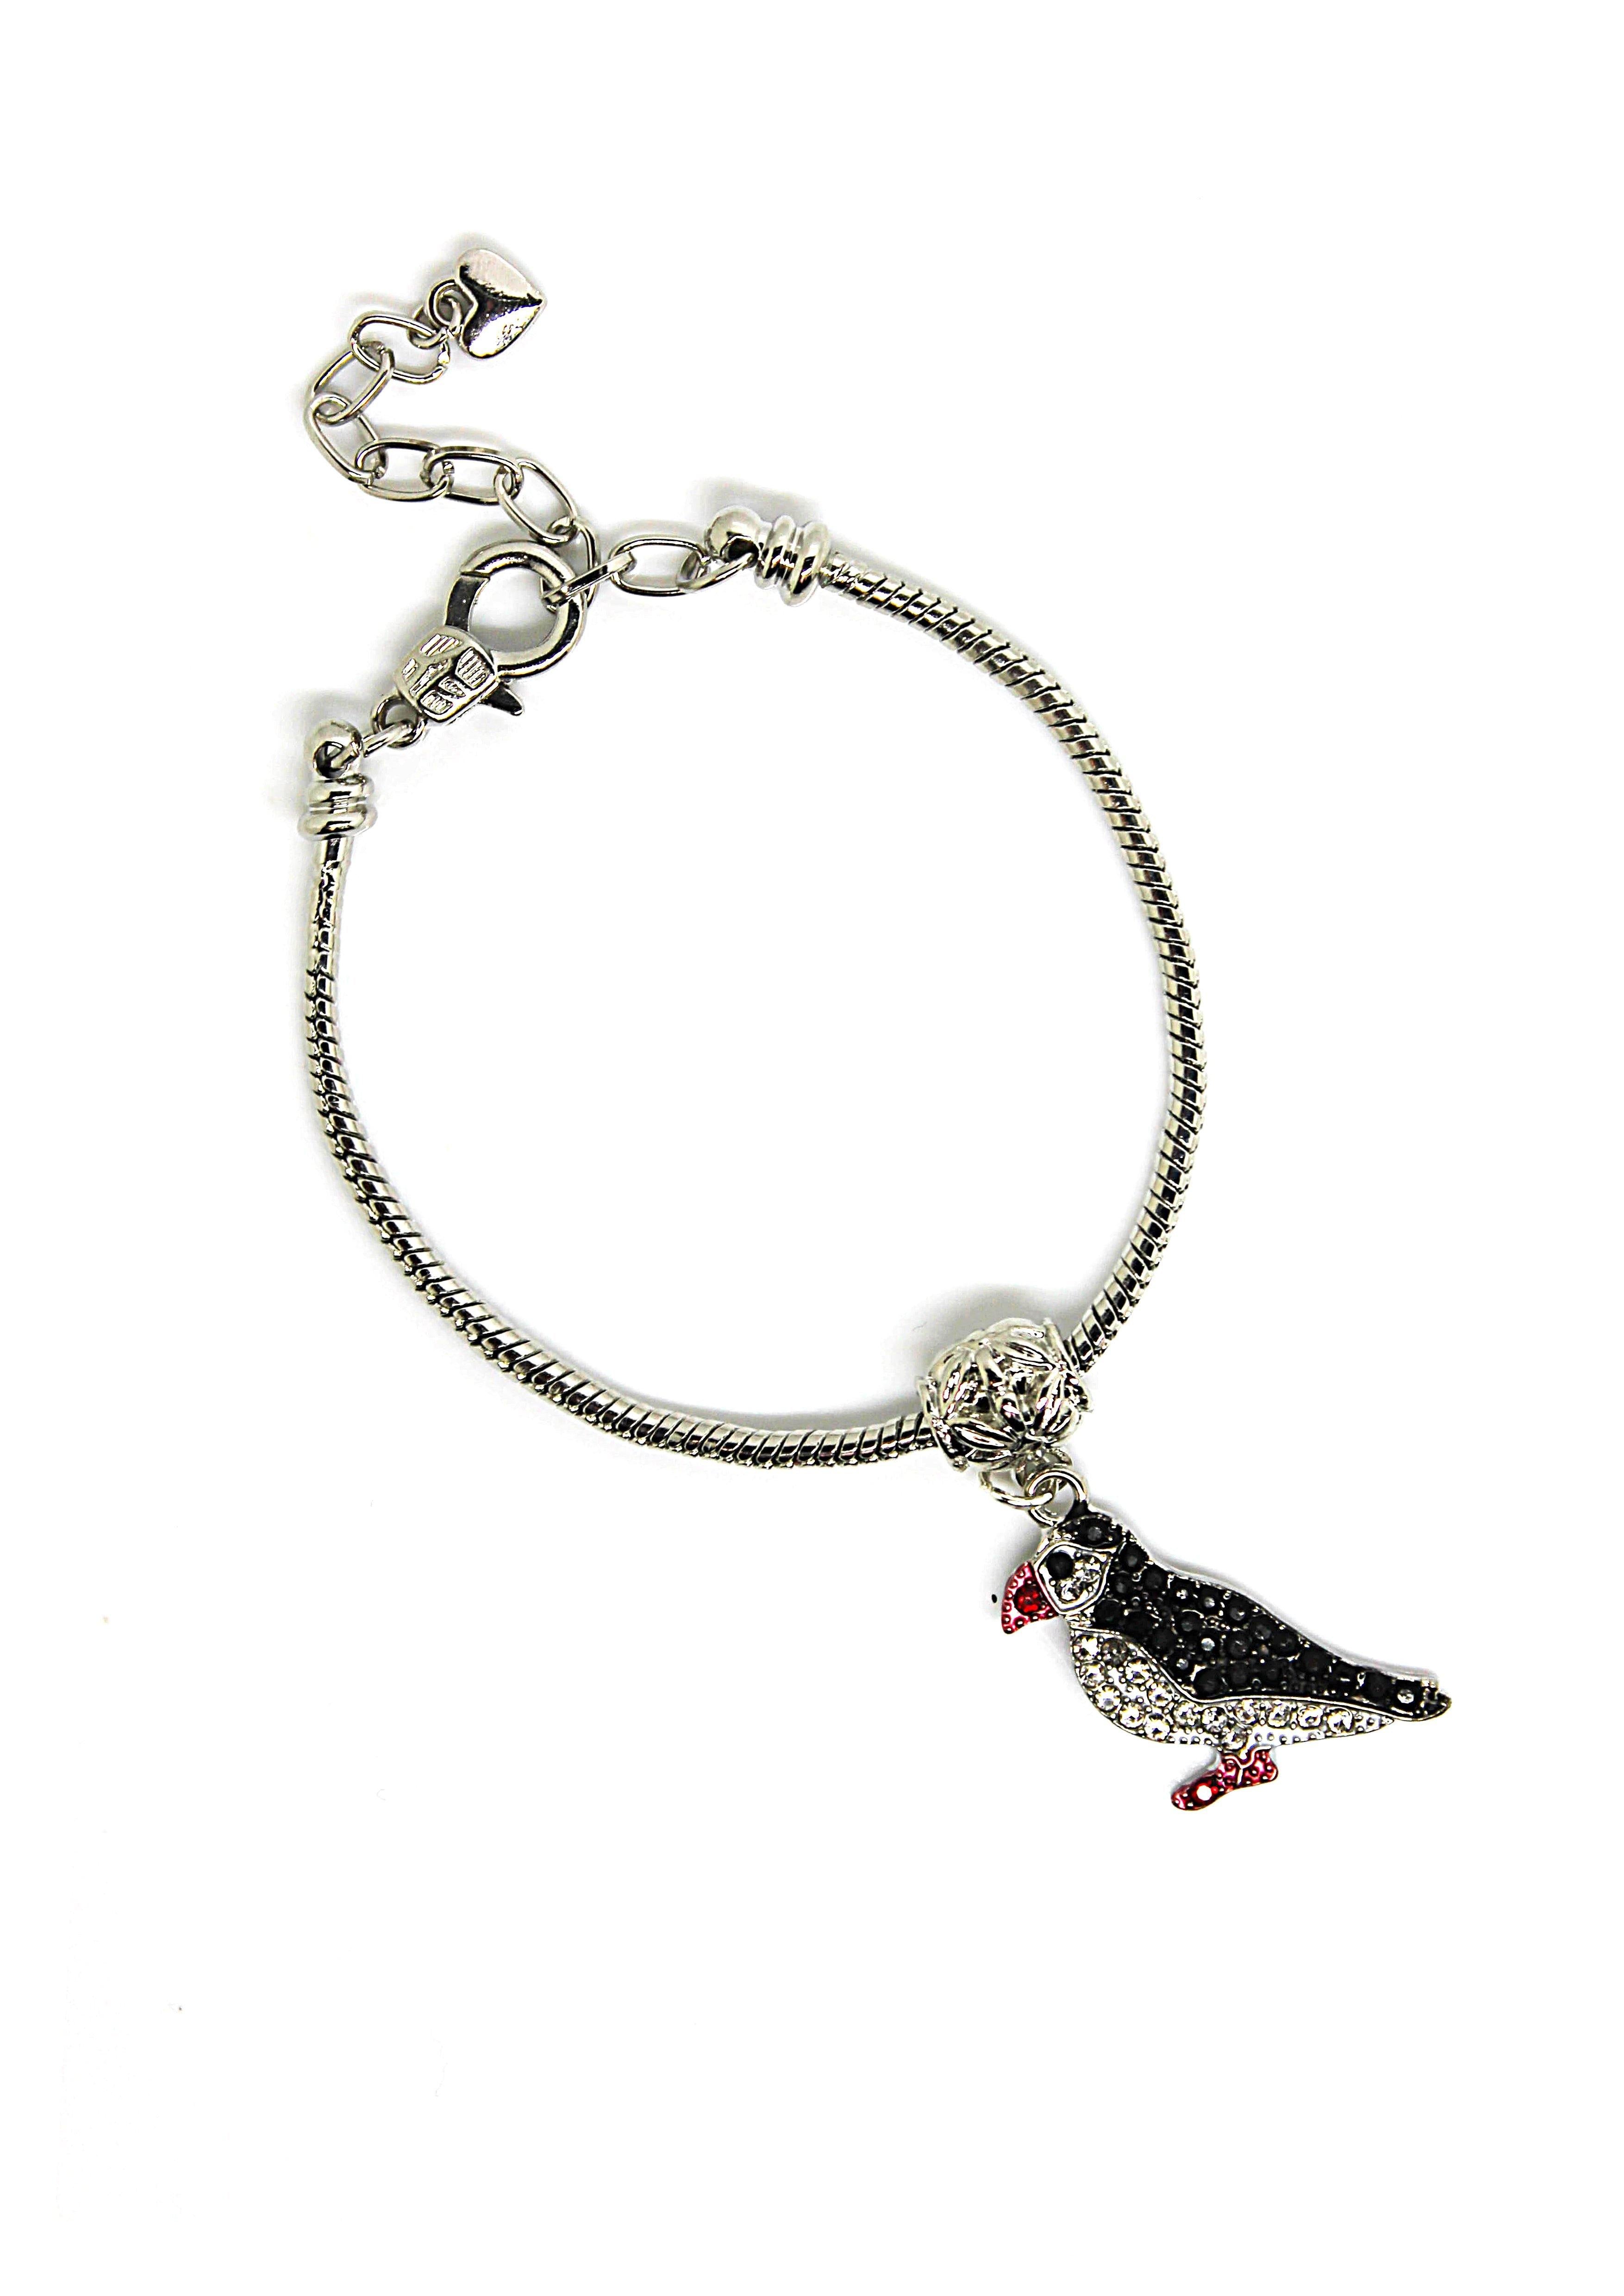 Puffin Charm Bracelet - Wildtouch - Wildtouch